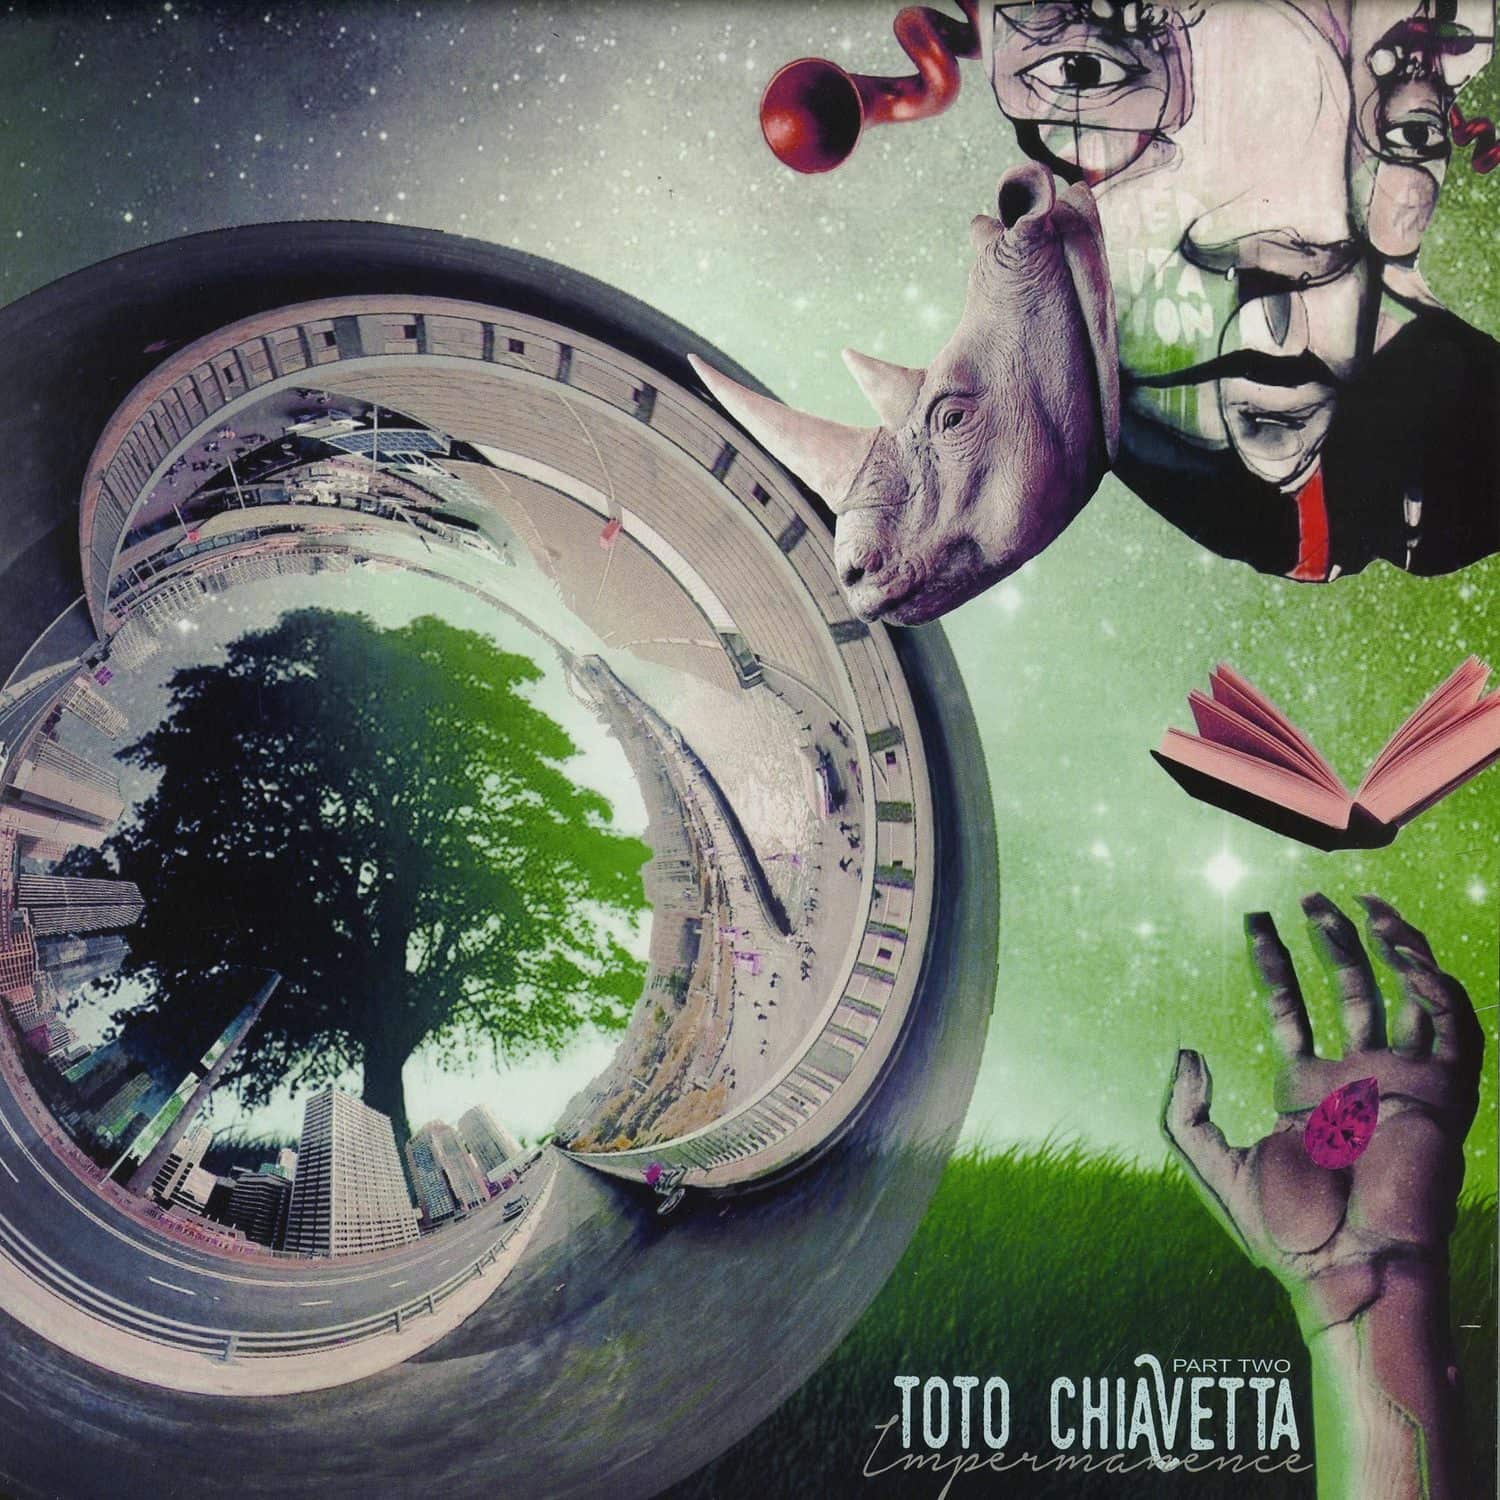 Toto Chiavetta - IMPERMANENCE PART TWO